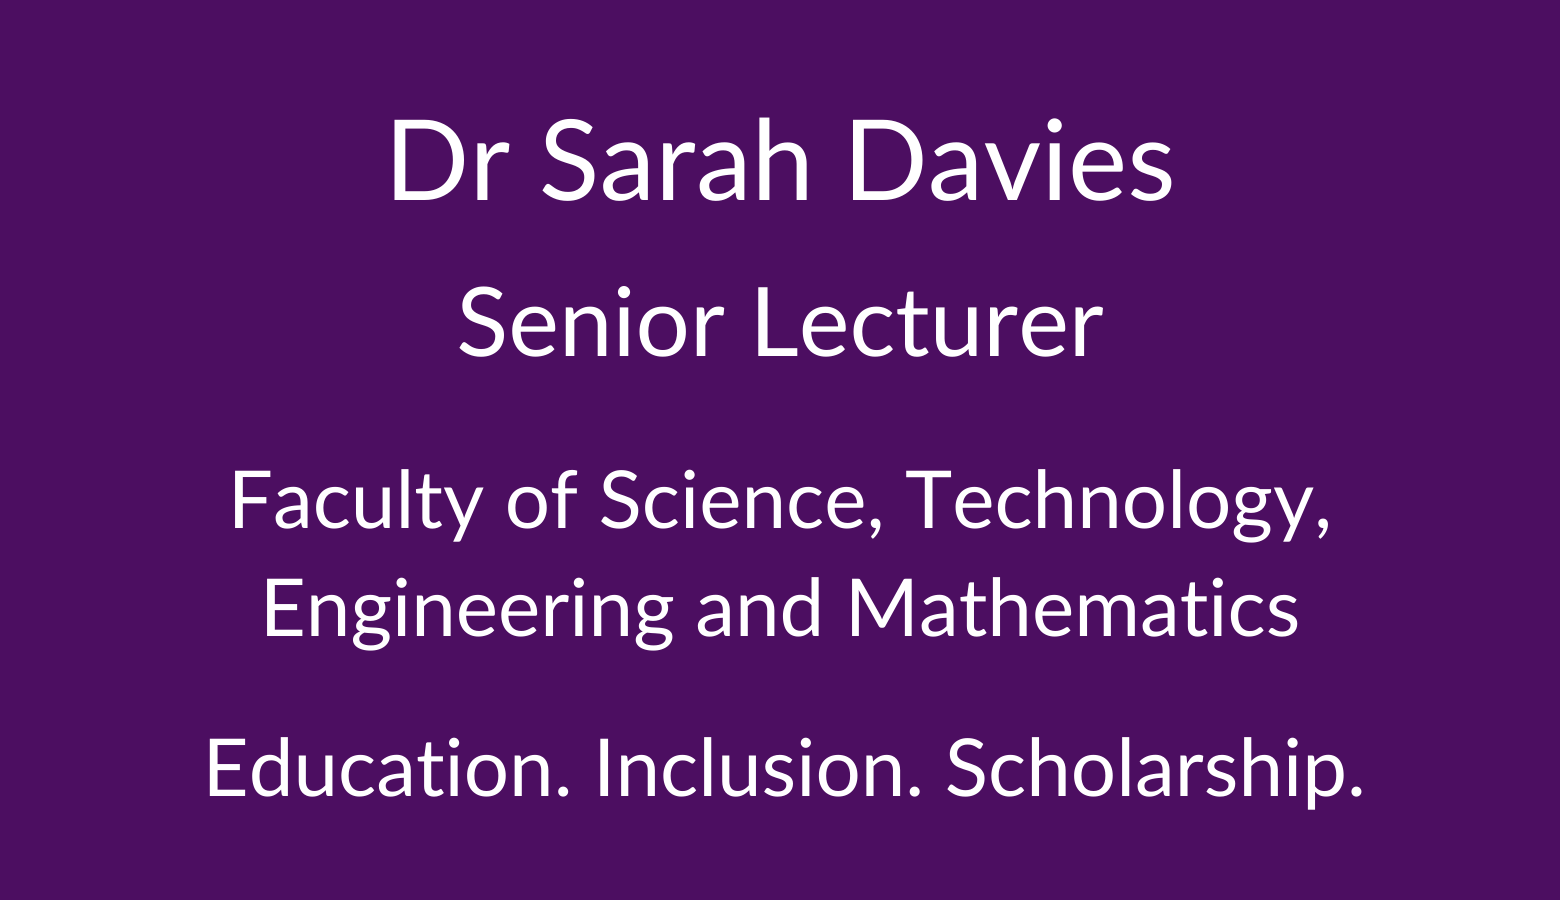 Dr Sarah Davies. Senior Lecturer. Faculty of Science. Technology, Engineering and Mathematics. Education. Inclusion. Scholarship.